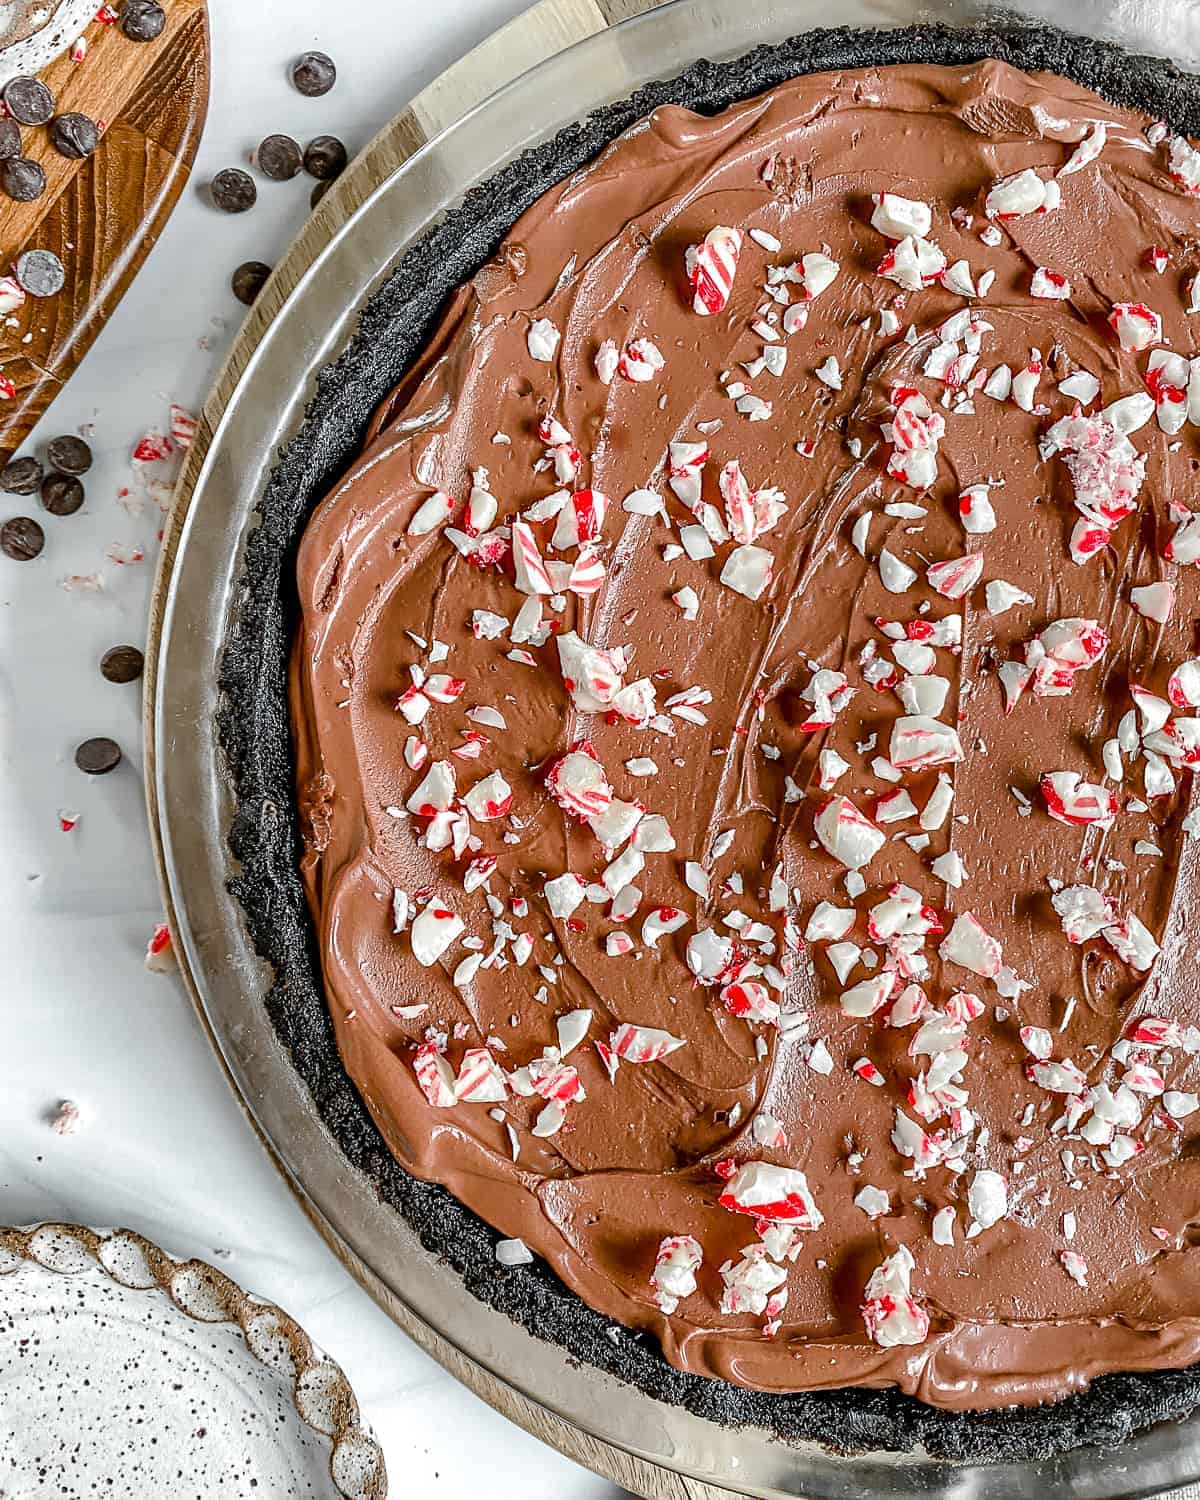 completed Silken Chocolate Peppermint Pie against a white background